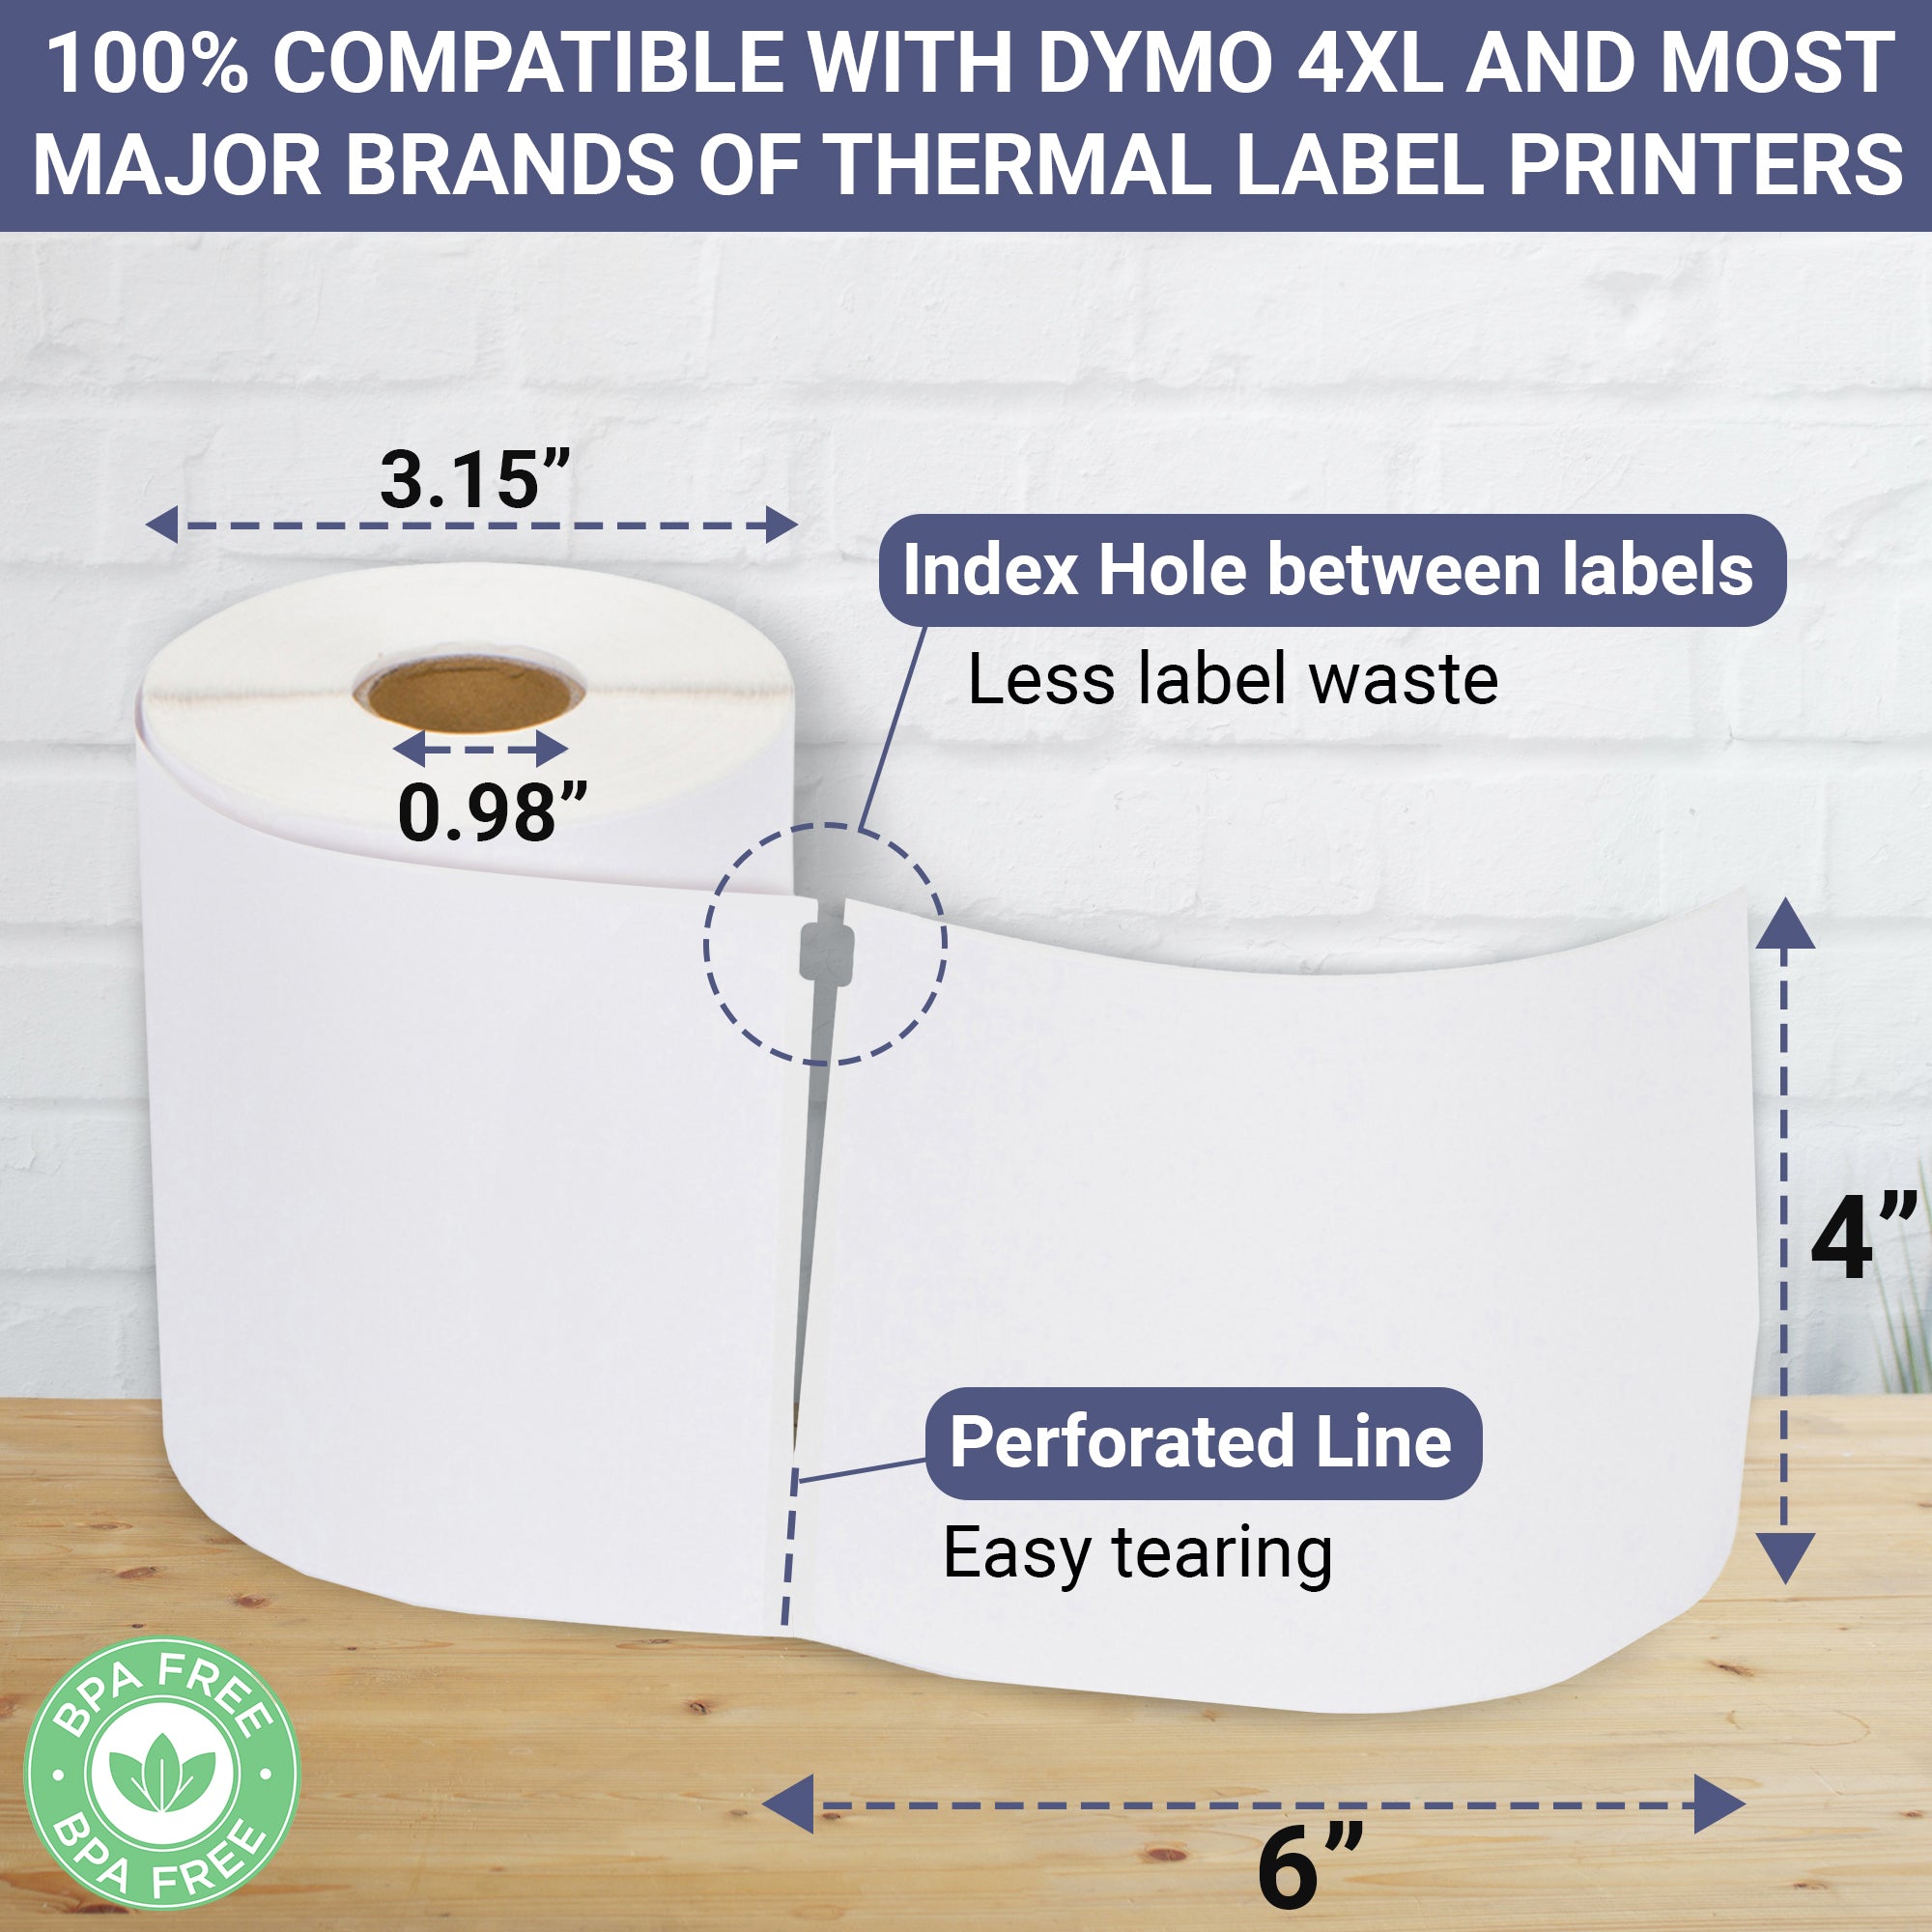 Manufacturing Dymo Compatible Thermal Printer Labels